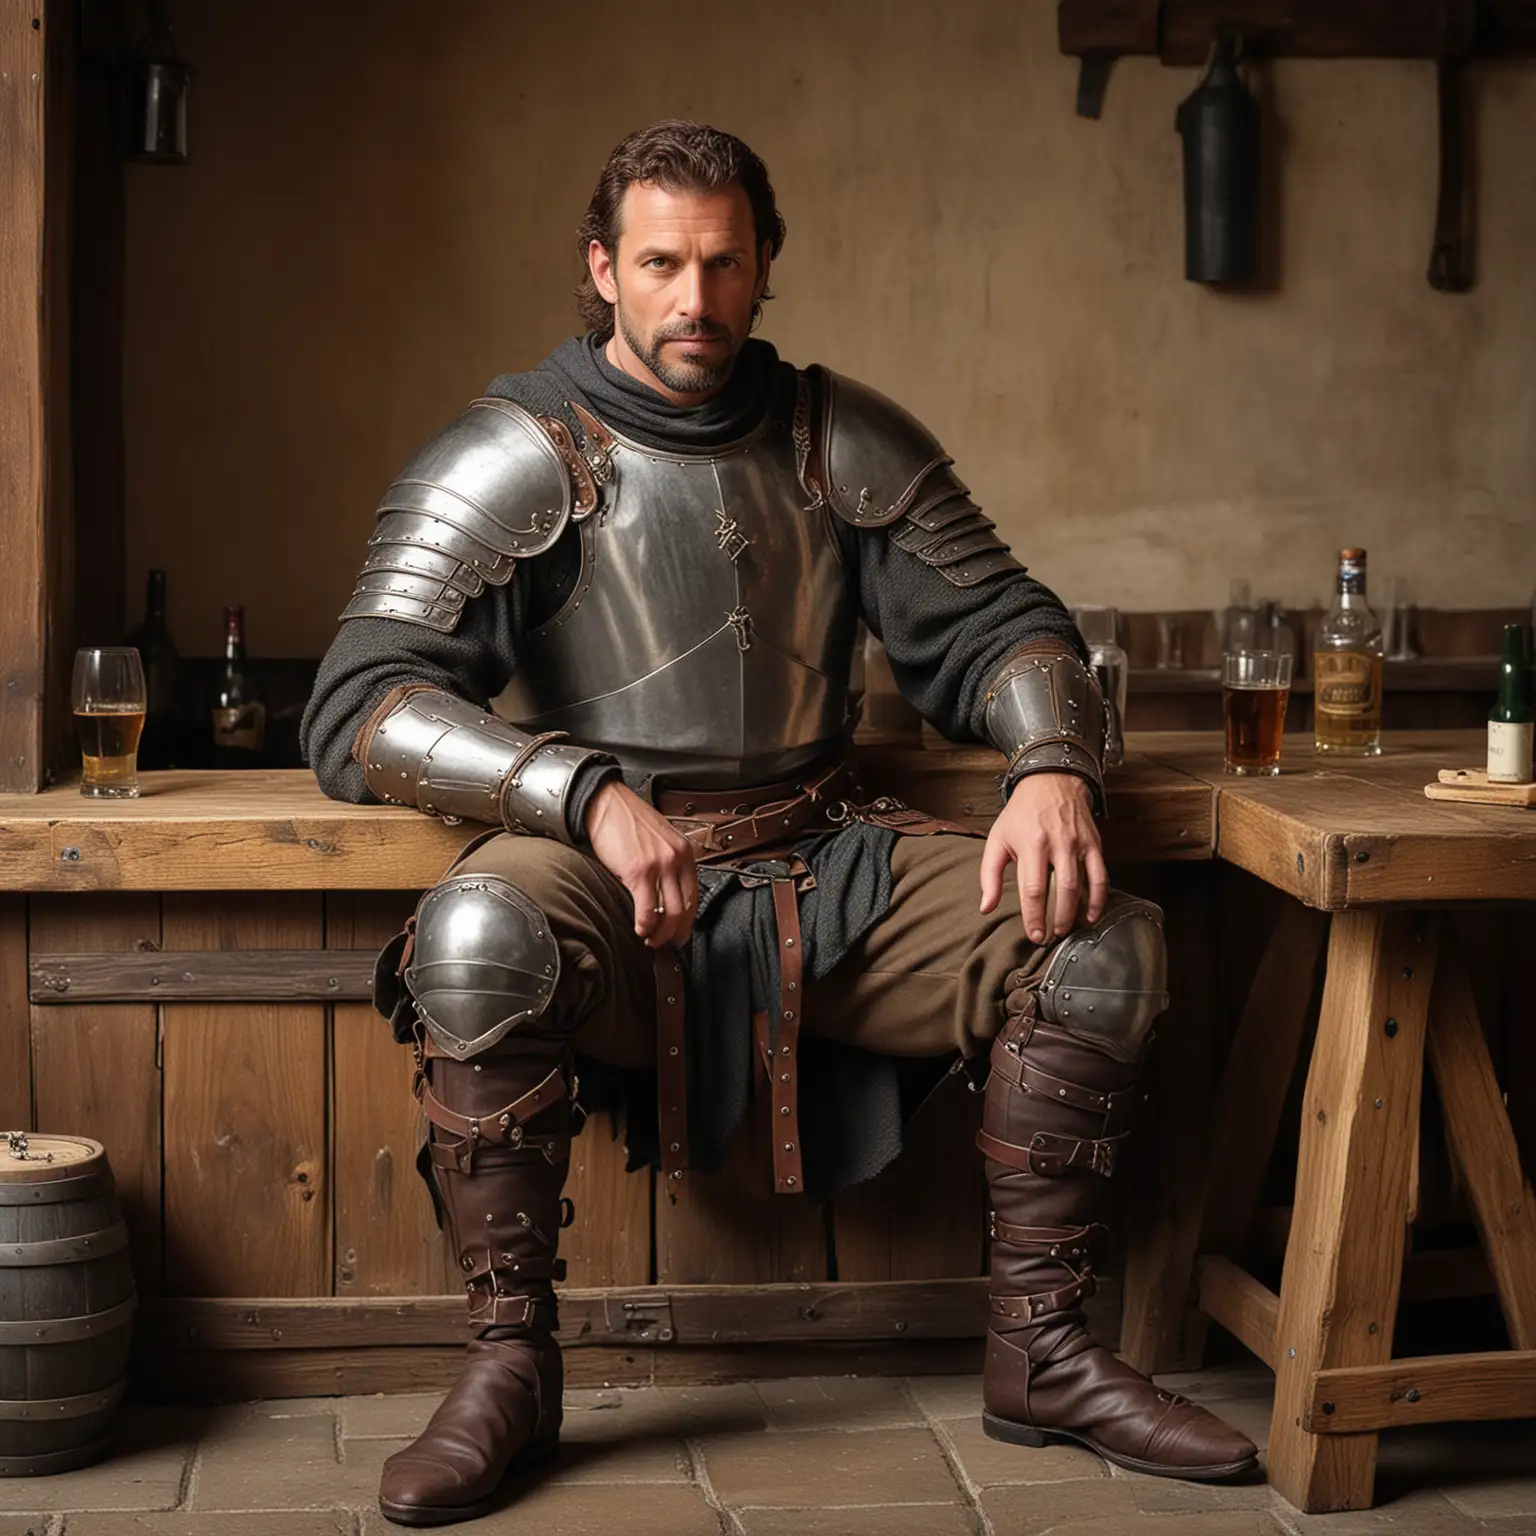 Medieval Warrior Rests at Tavern Bar with Wounded Leg